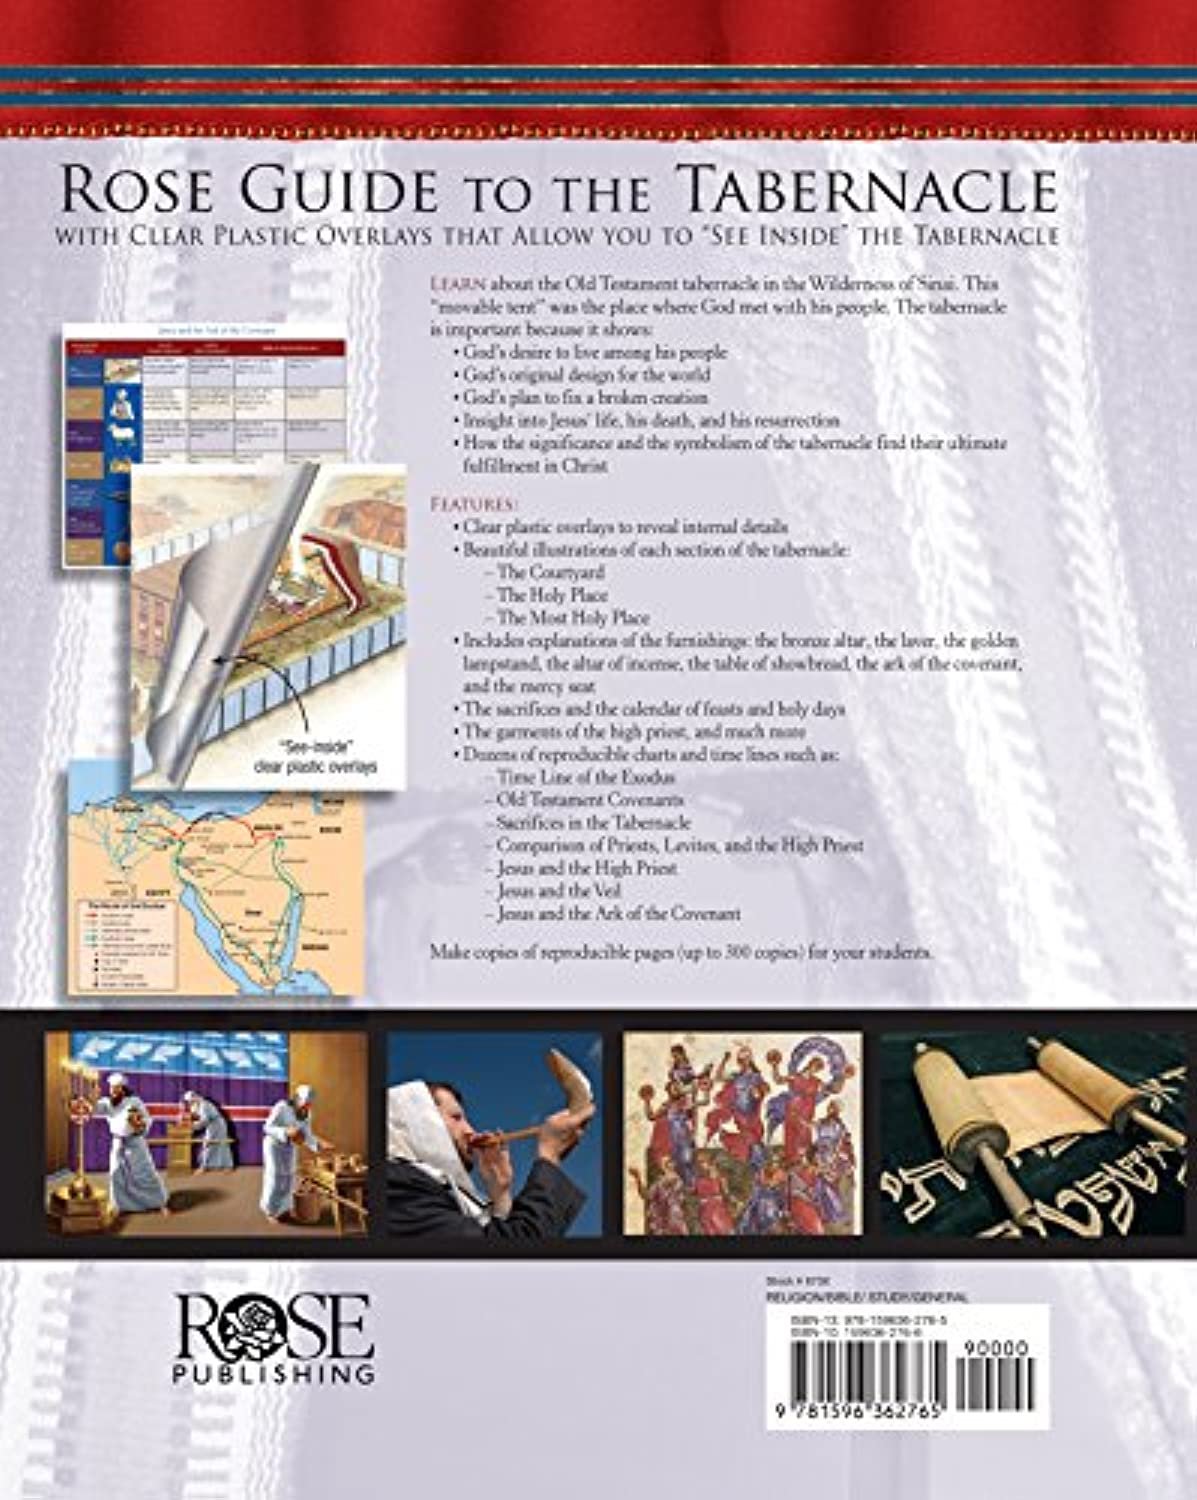 Rose Guide to the Tabernacle (Hardcover) - image 2 of 4